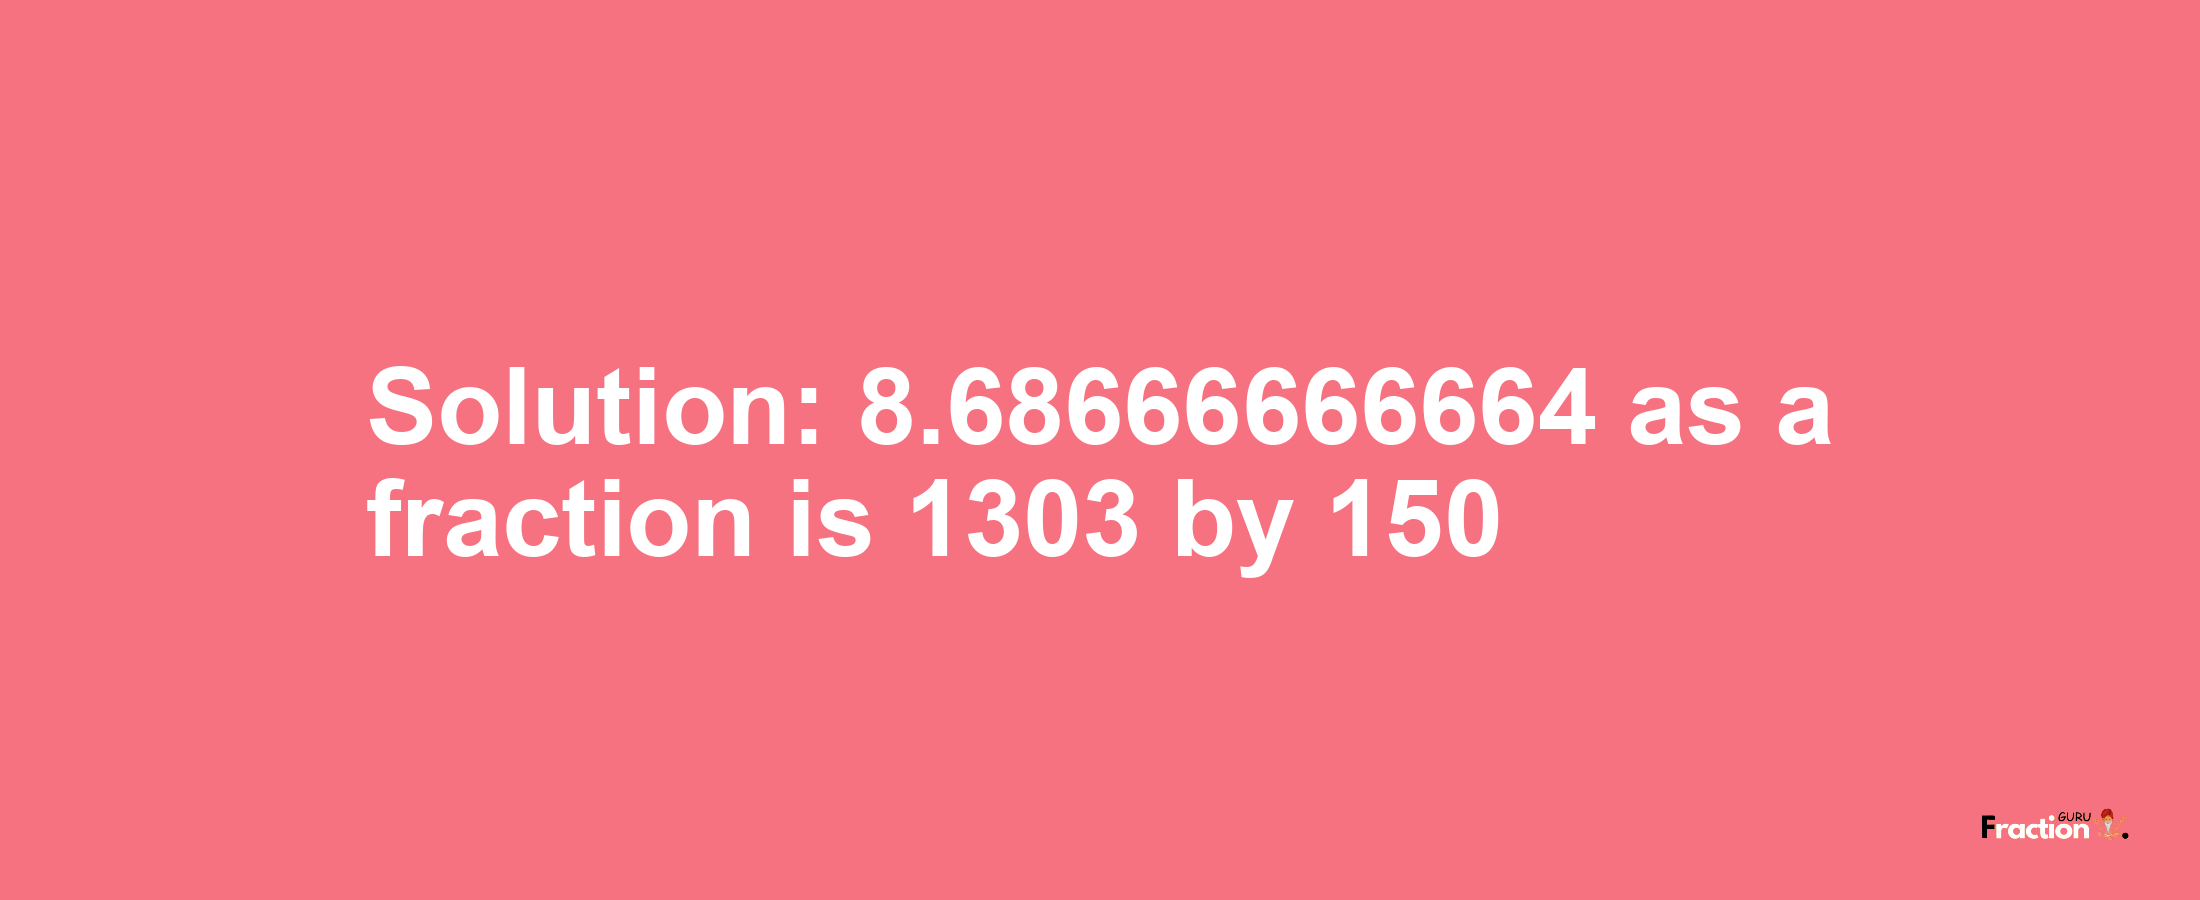 Solution:8.68666666664 as a fraction is 1303/150